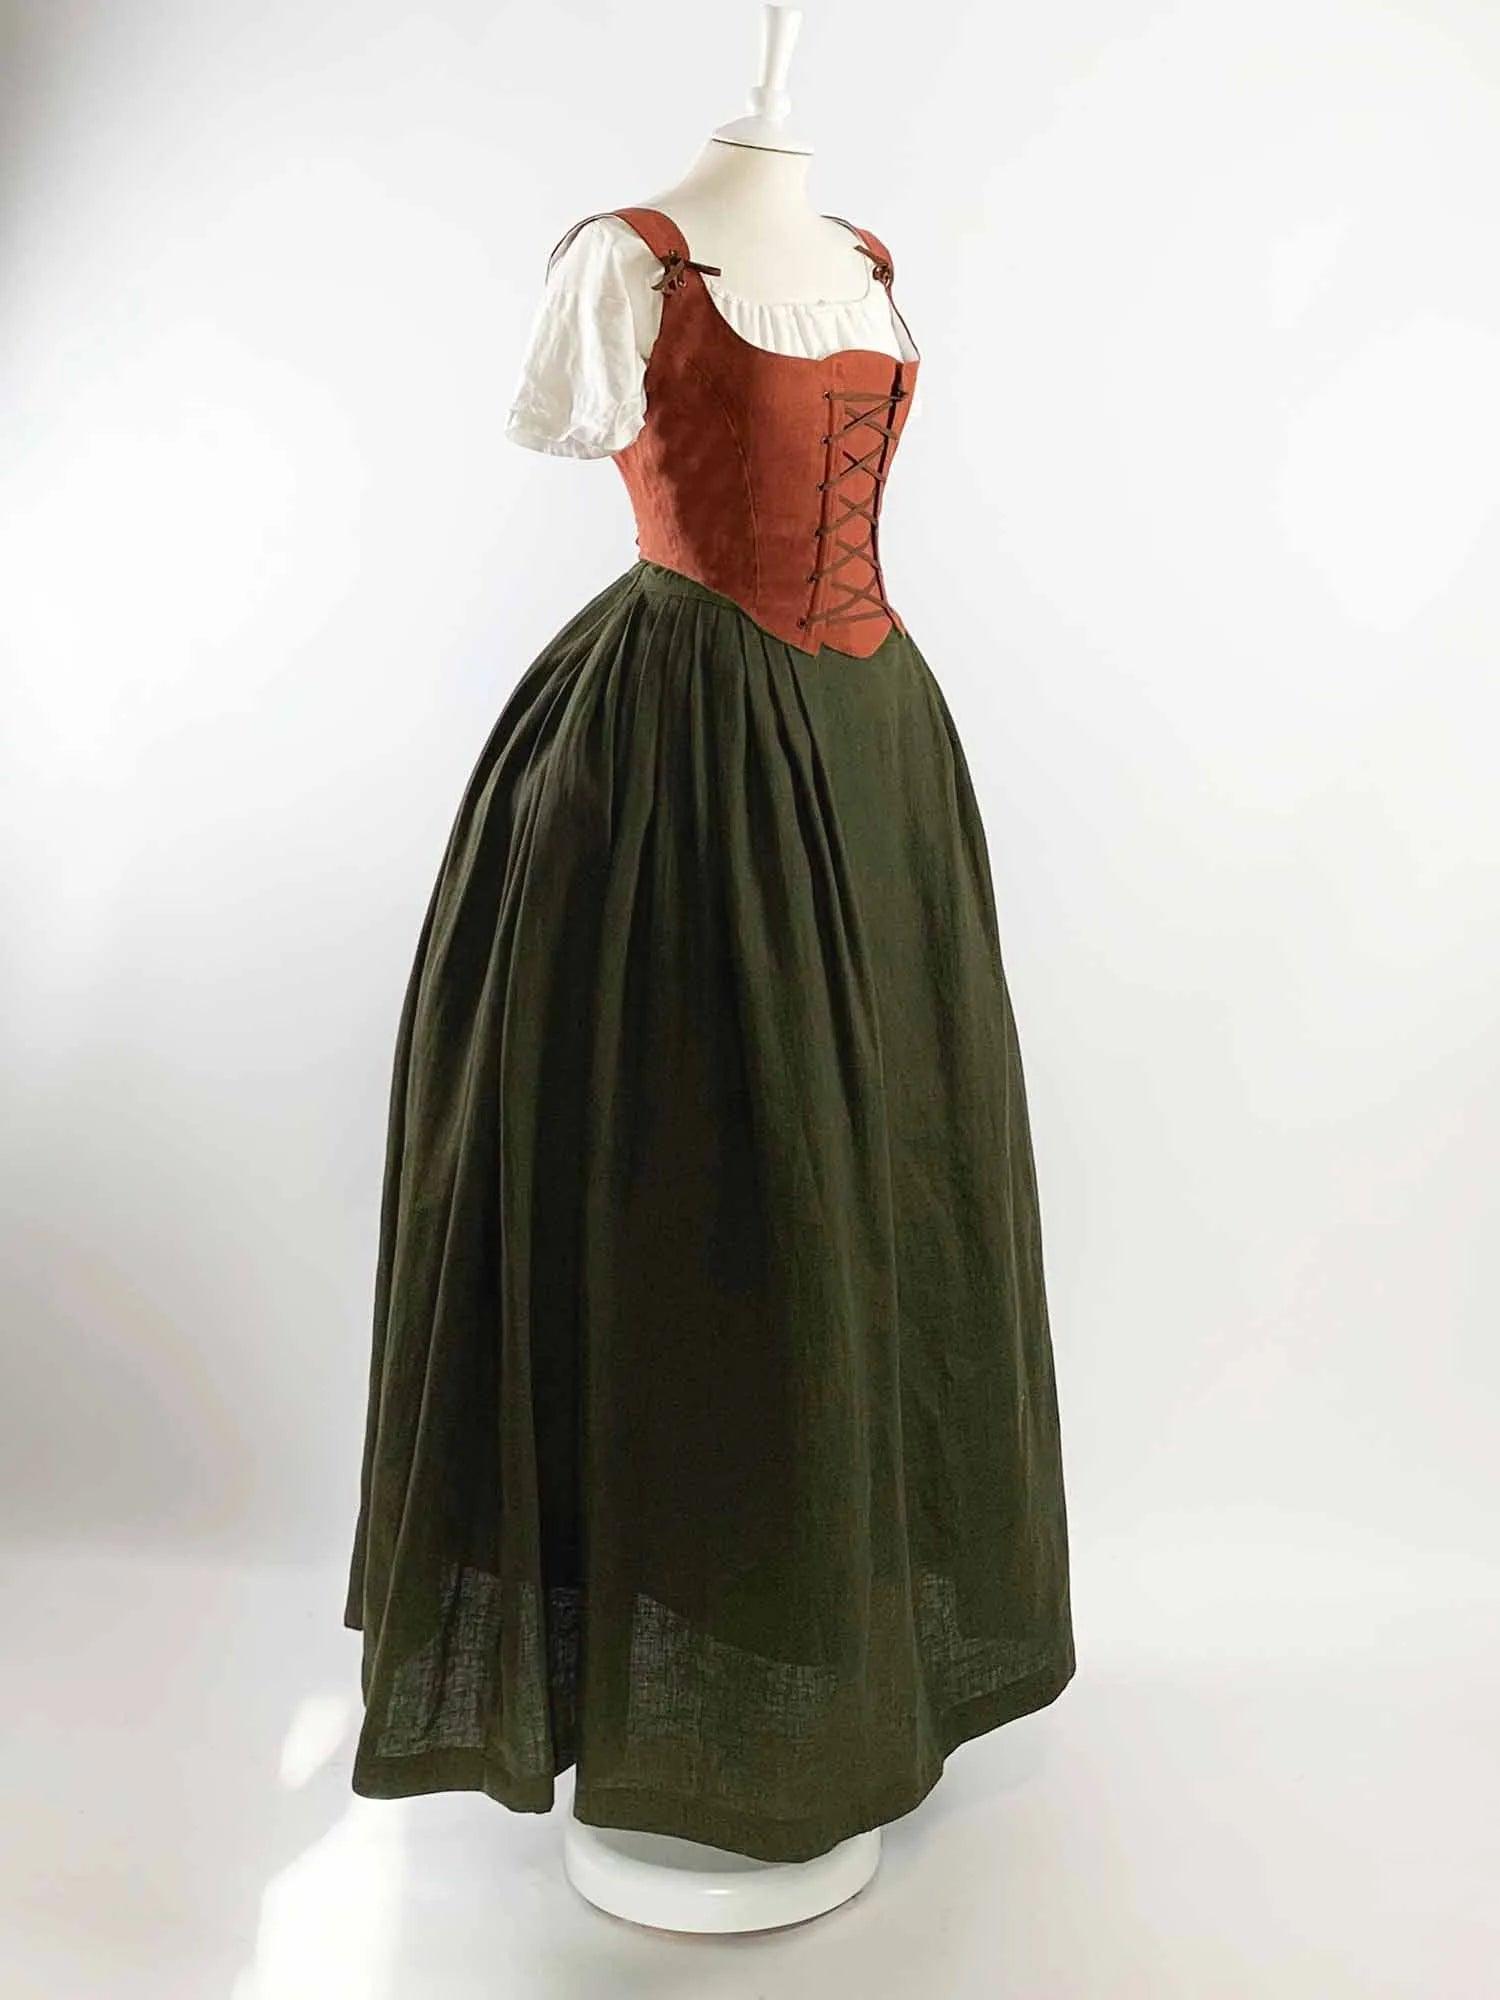 18th-century Dress, CHARLOTTE Overdress in Sage Green Linen With